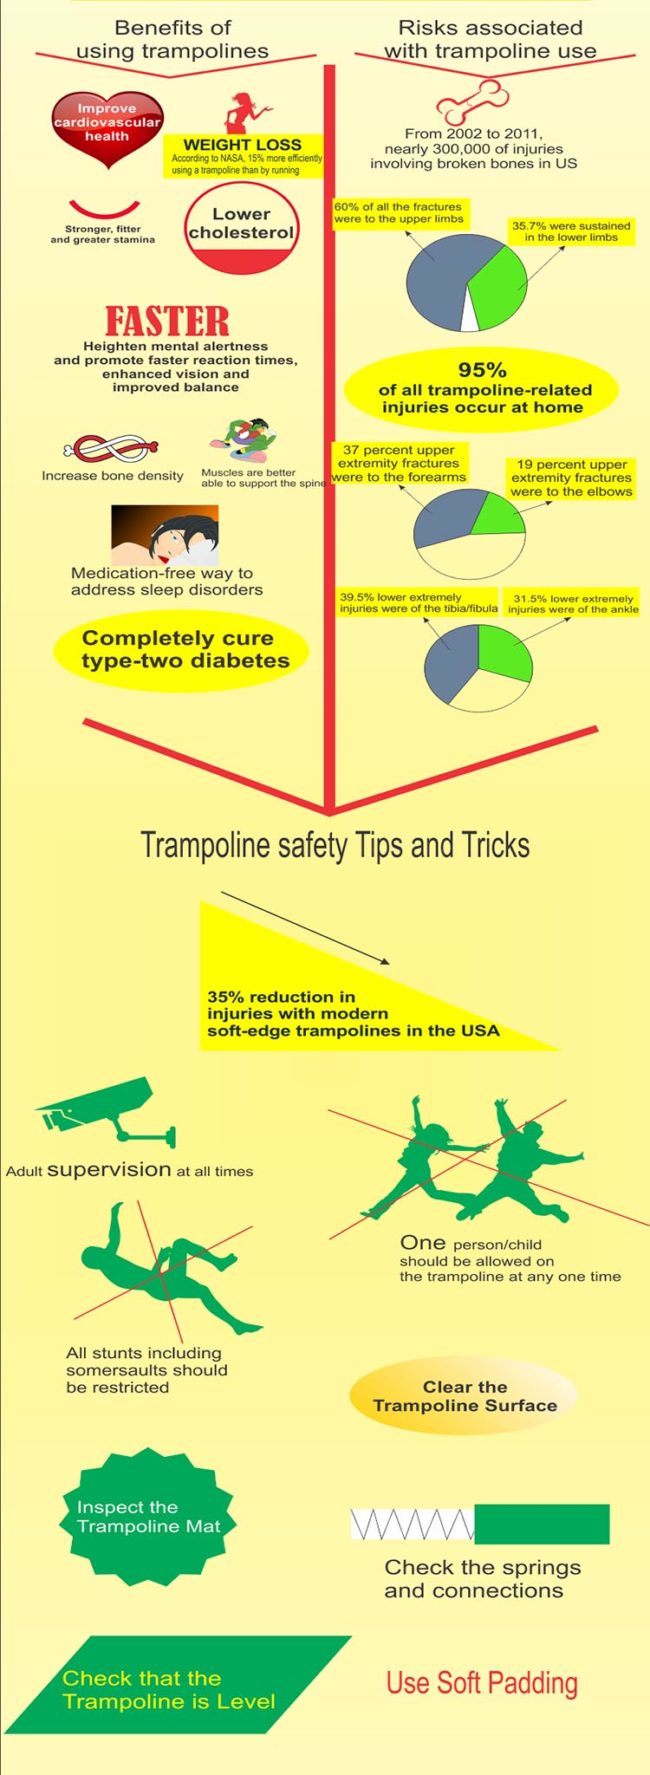 Is trampoline safety and fitness for you?